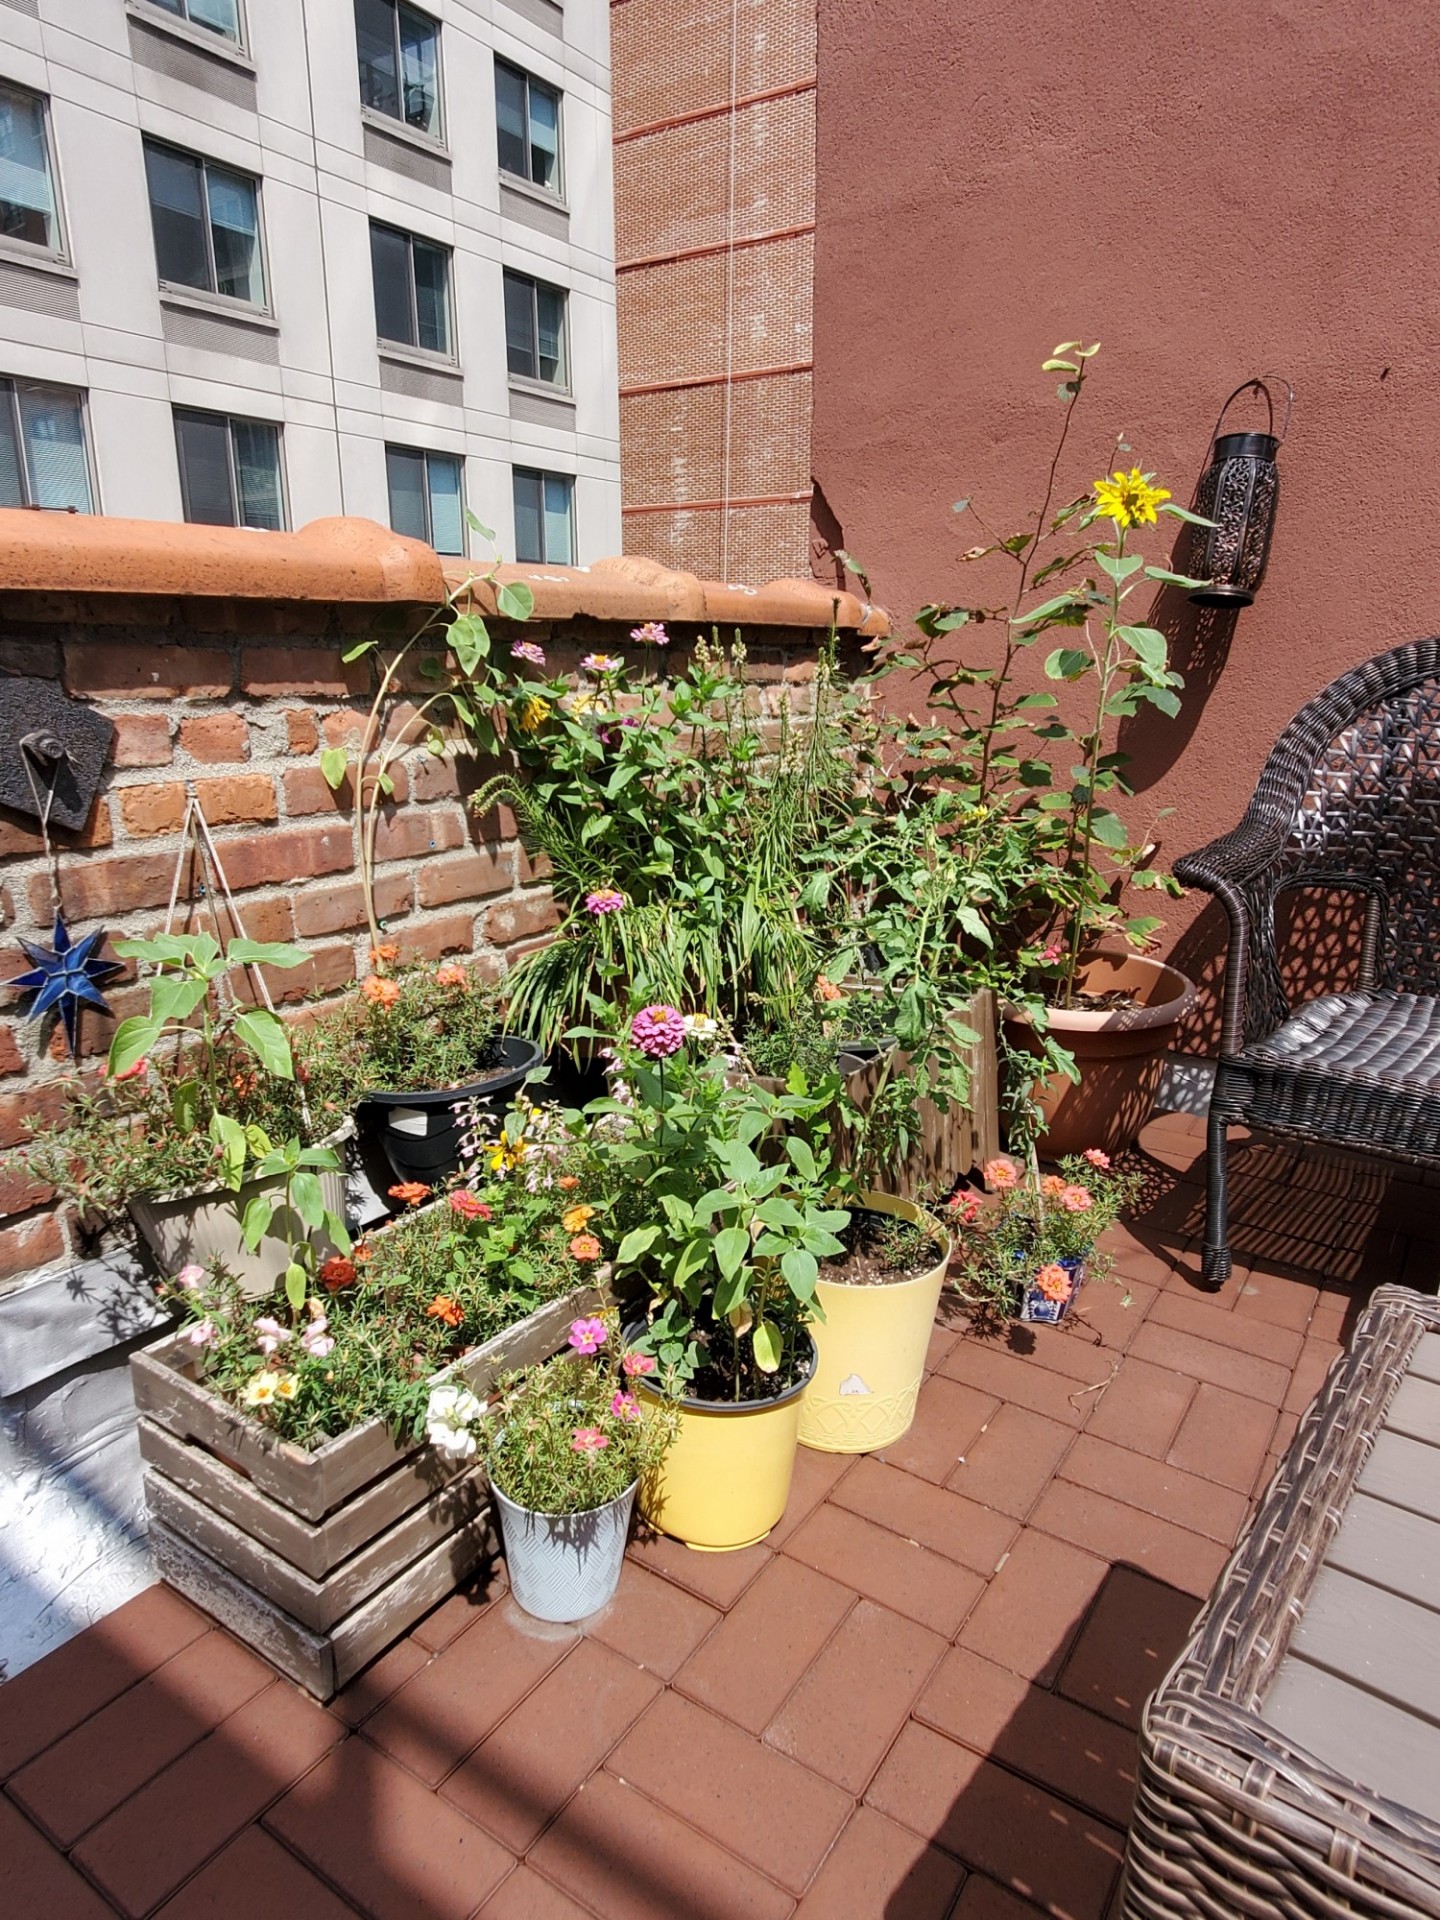 Rooftop garden with potted plants surrounded by brick and cobblestone